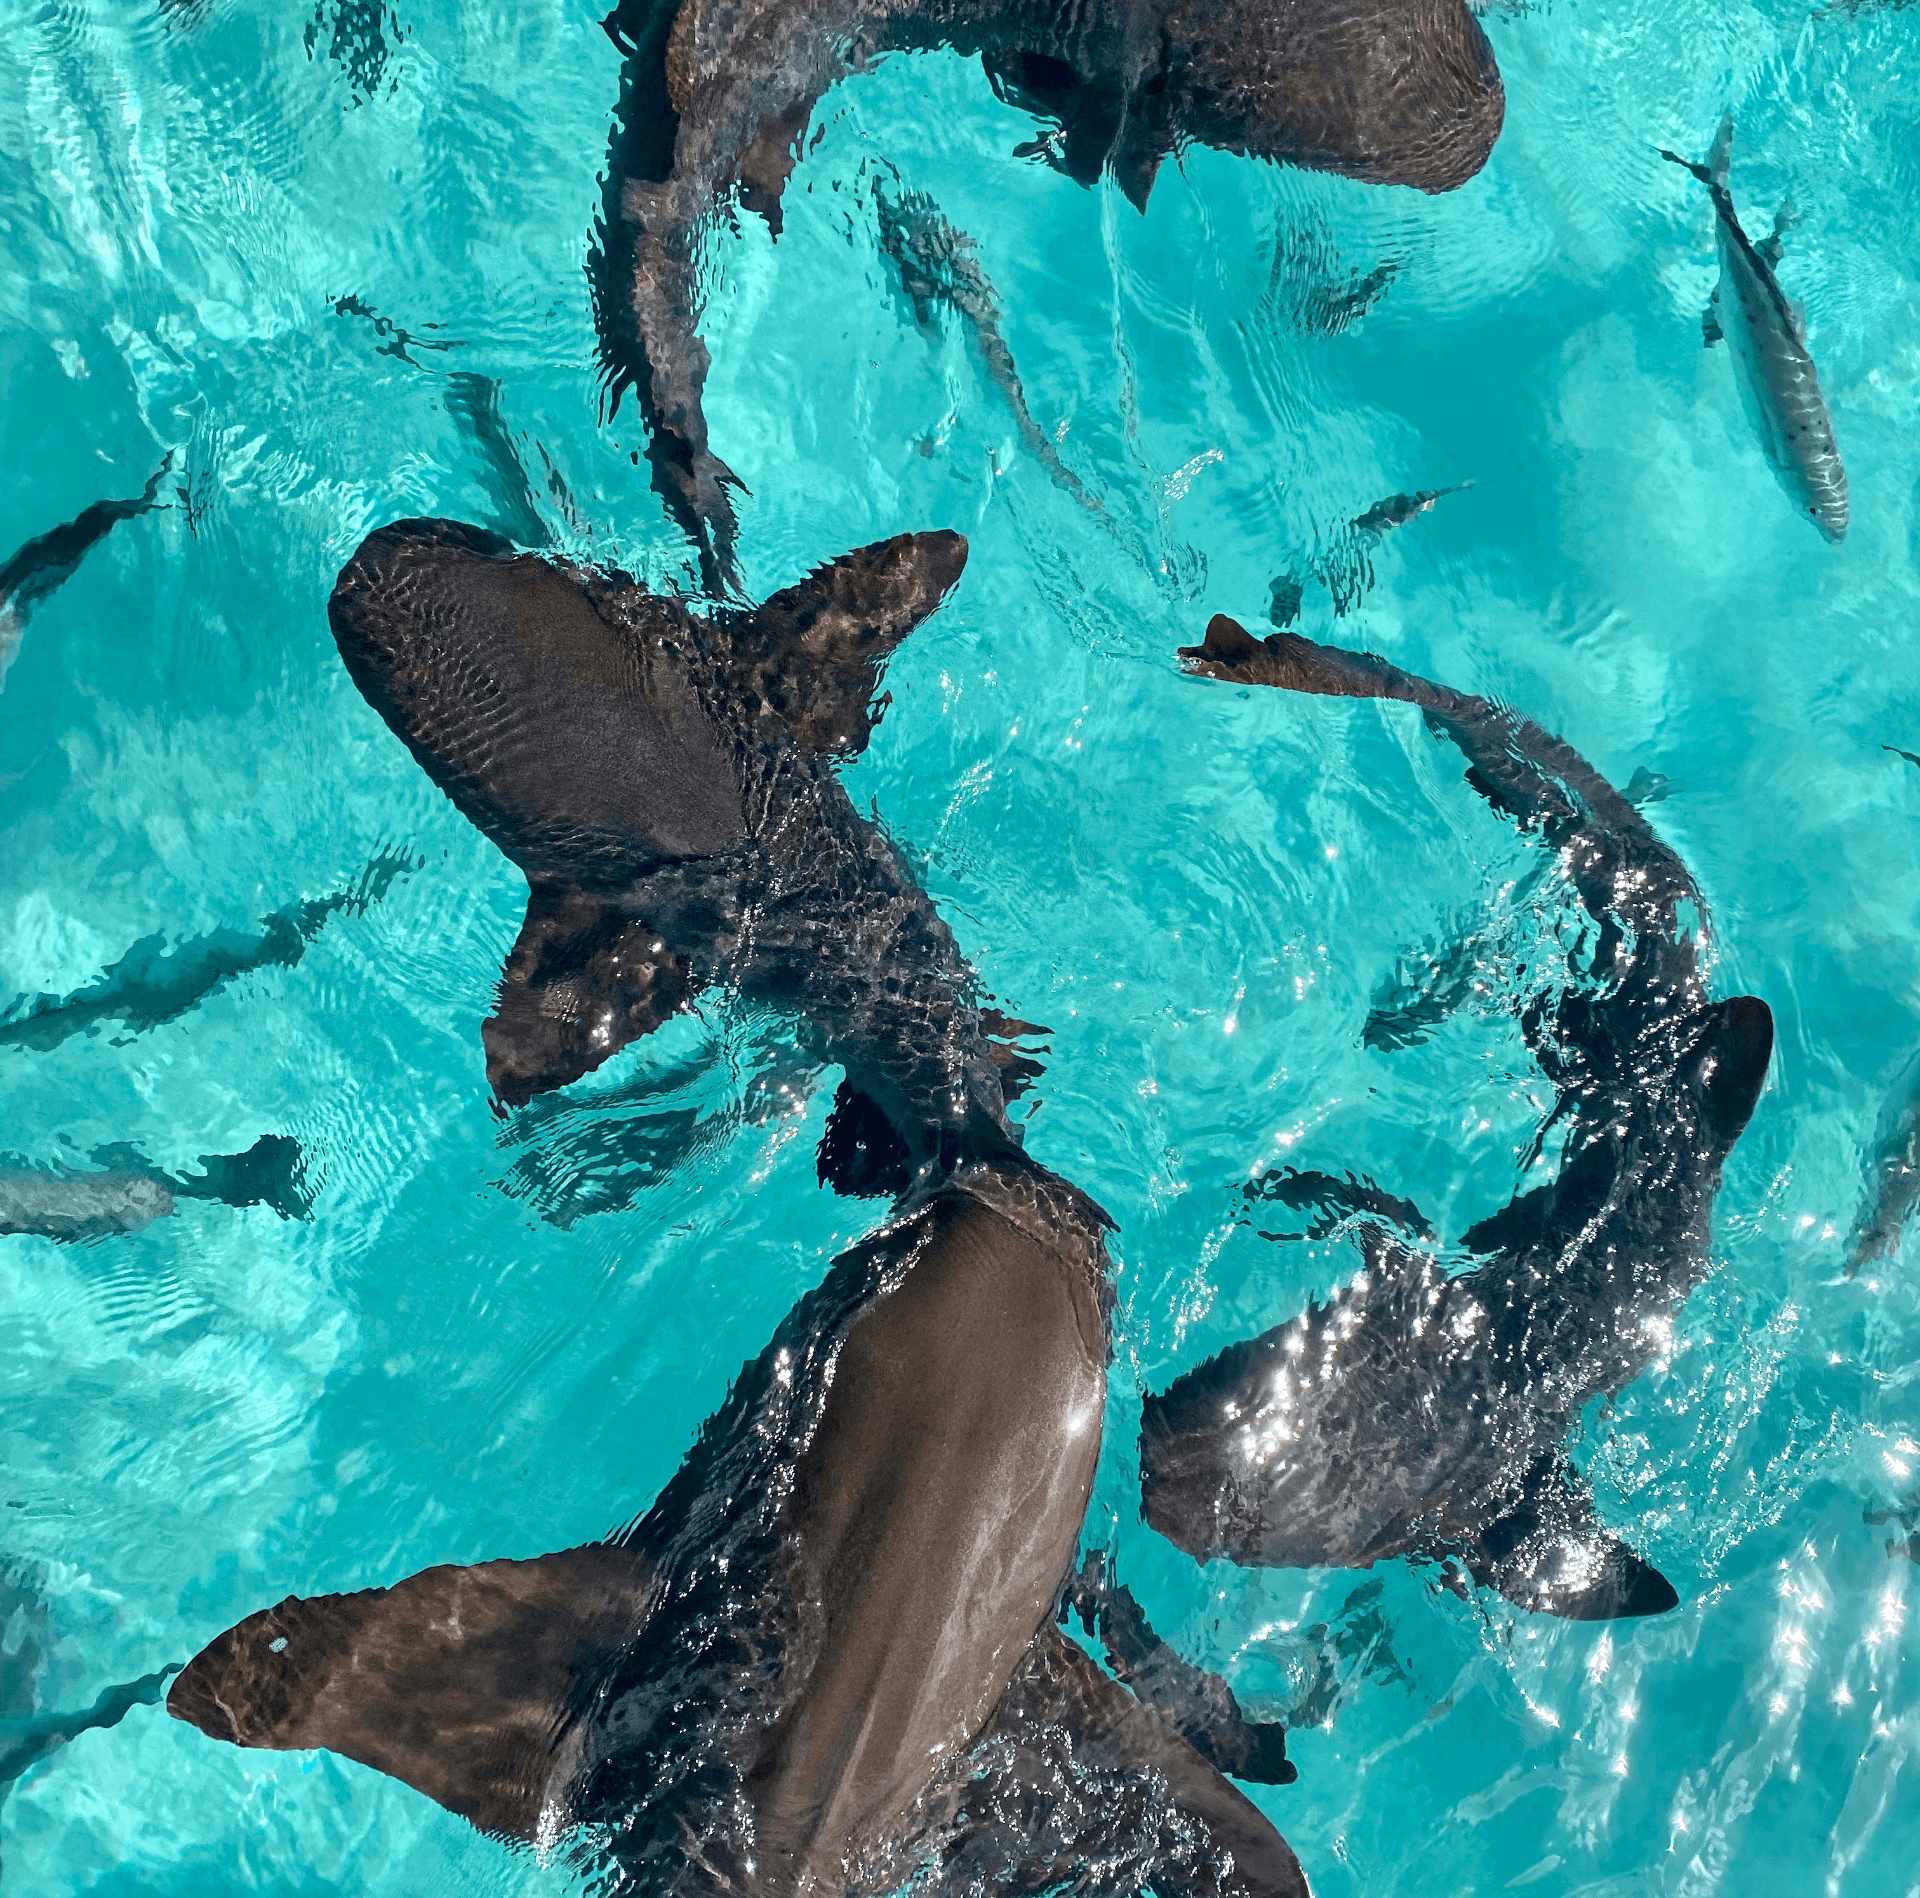 Sharks in the water of Bahamas island